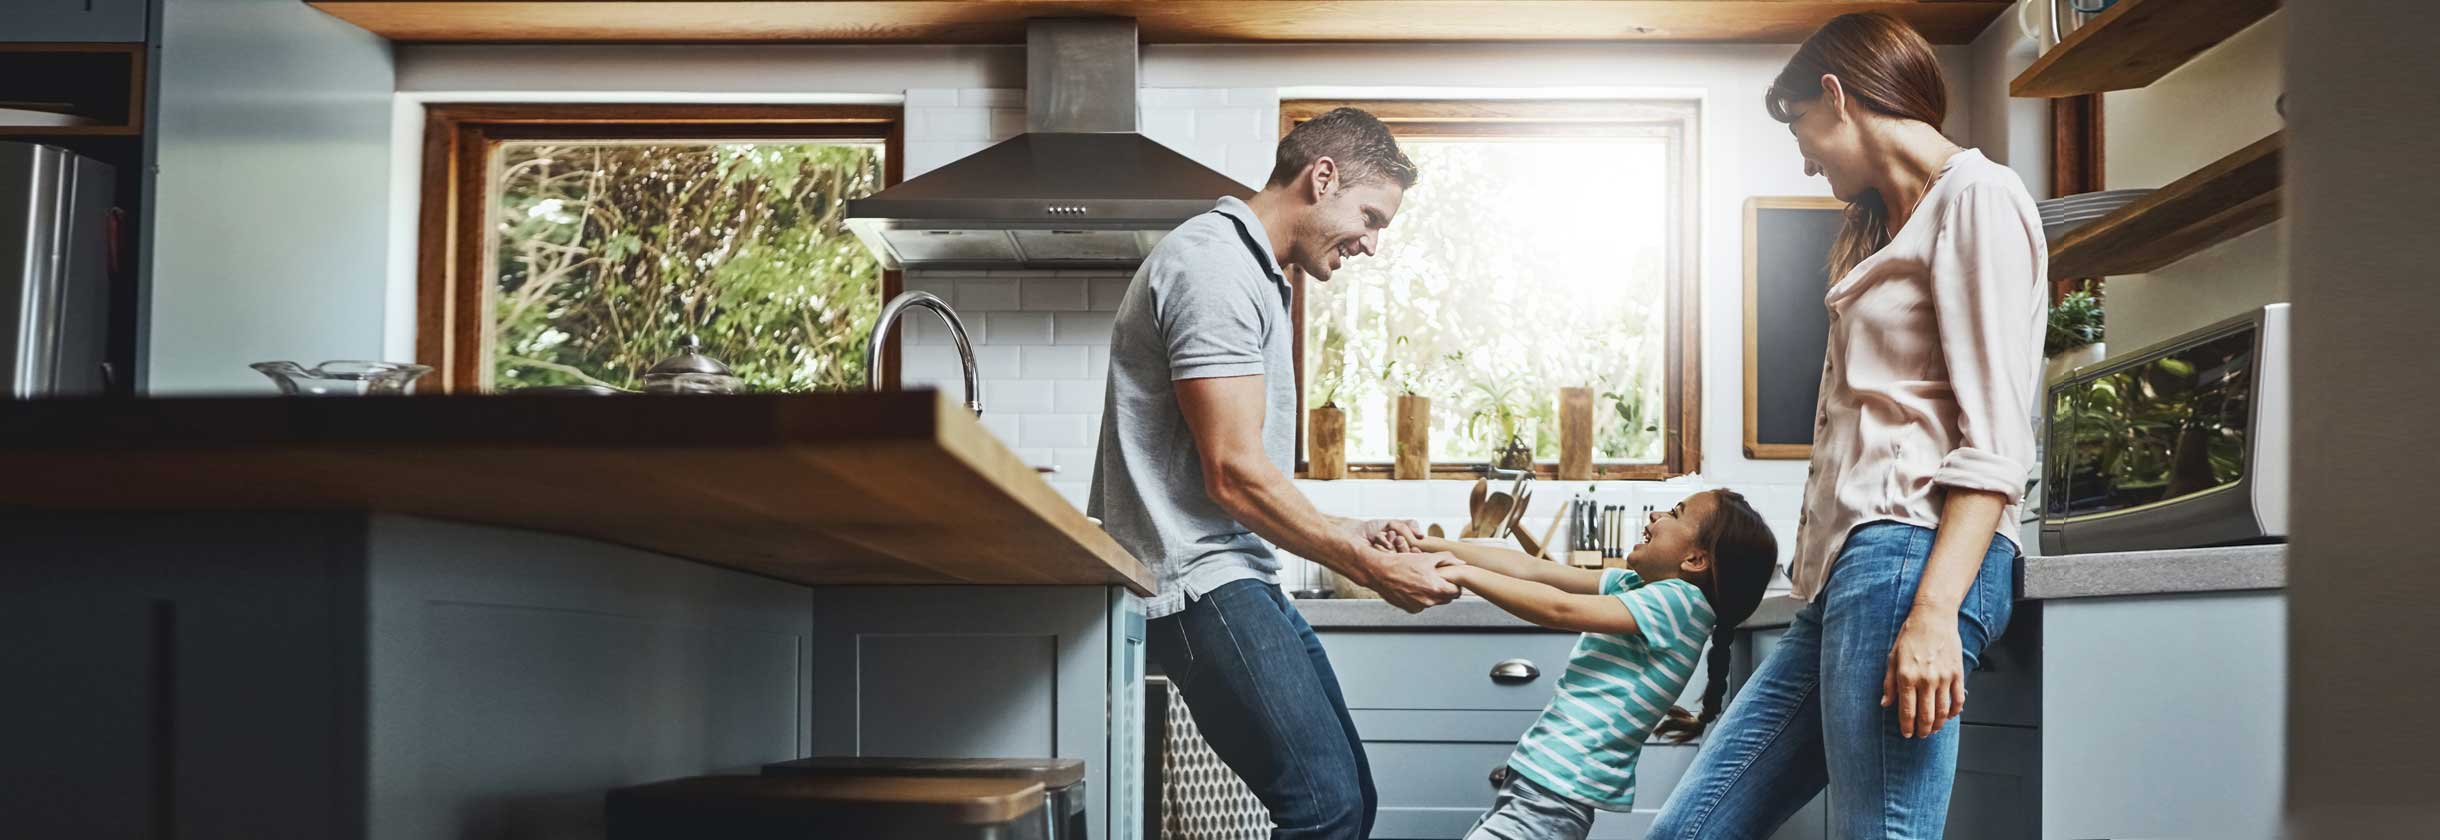 Parents playing in the kitchen with child